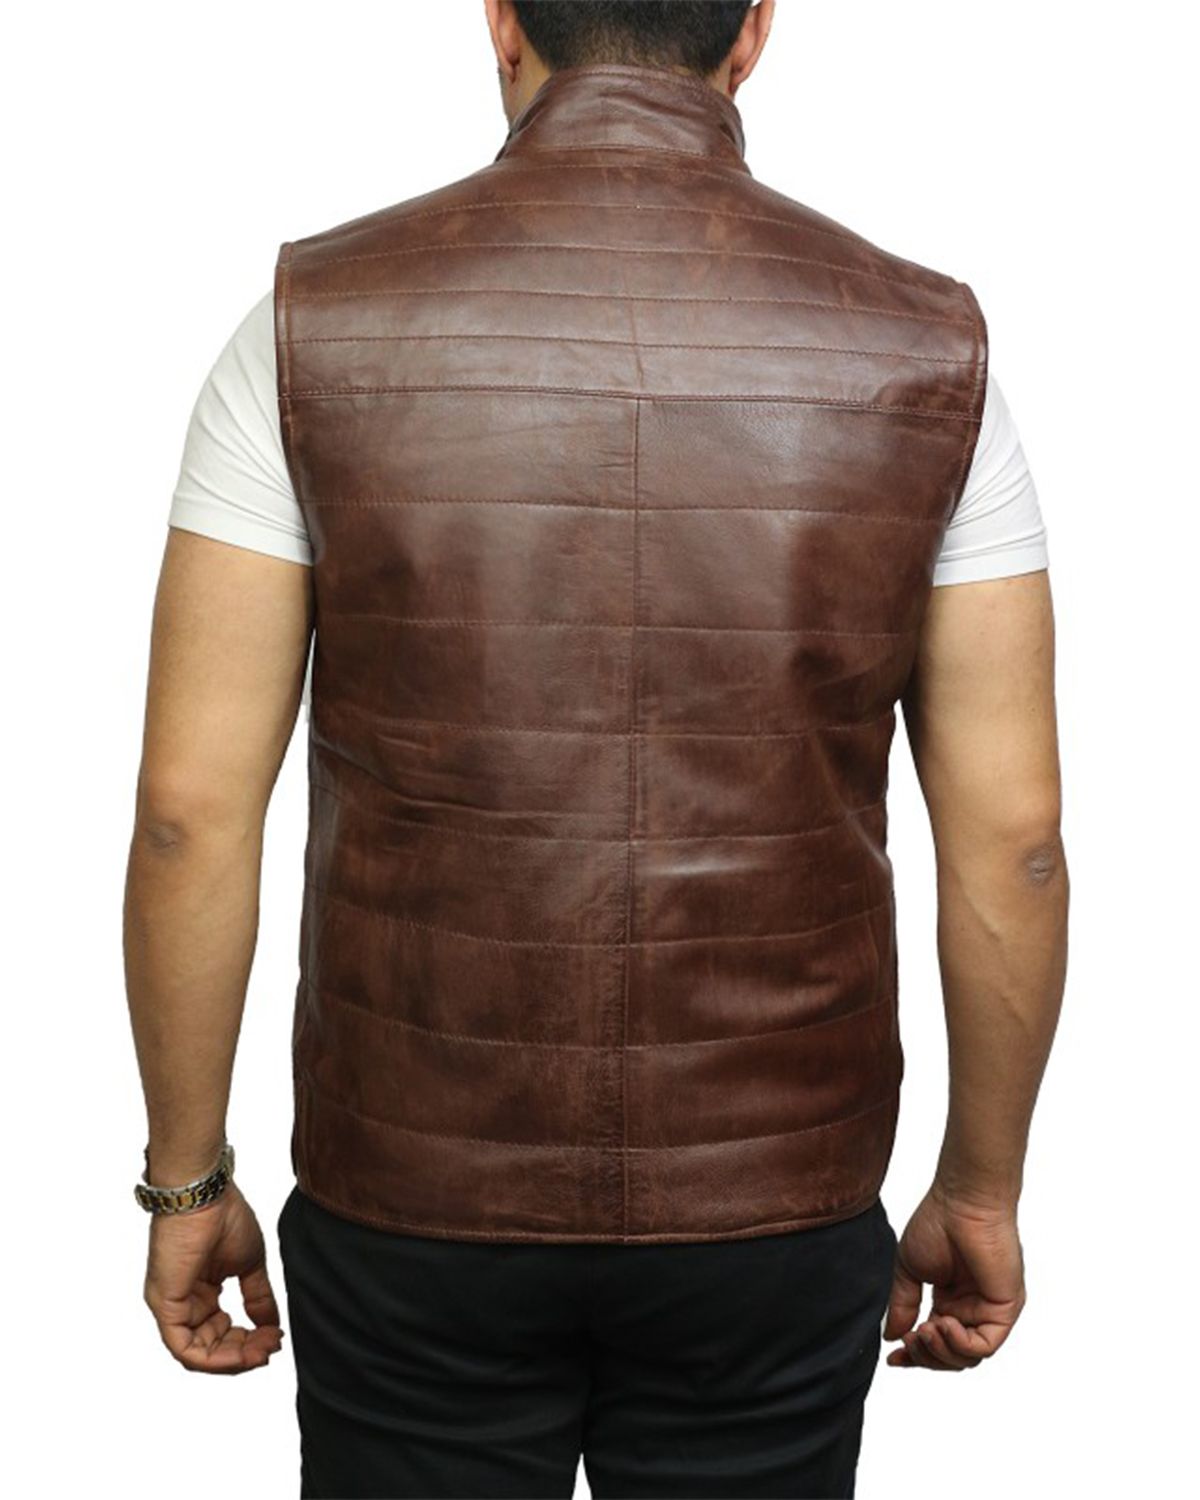 Brown Leather Double Sided Padded Vest | Elite Jacket